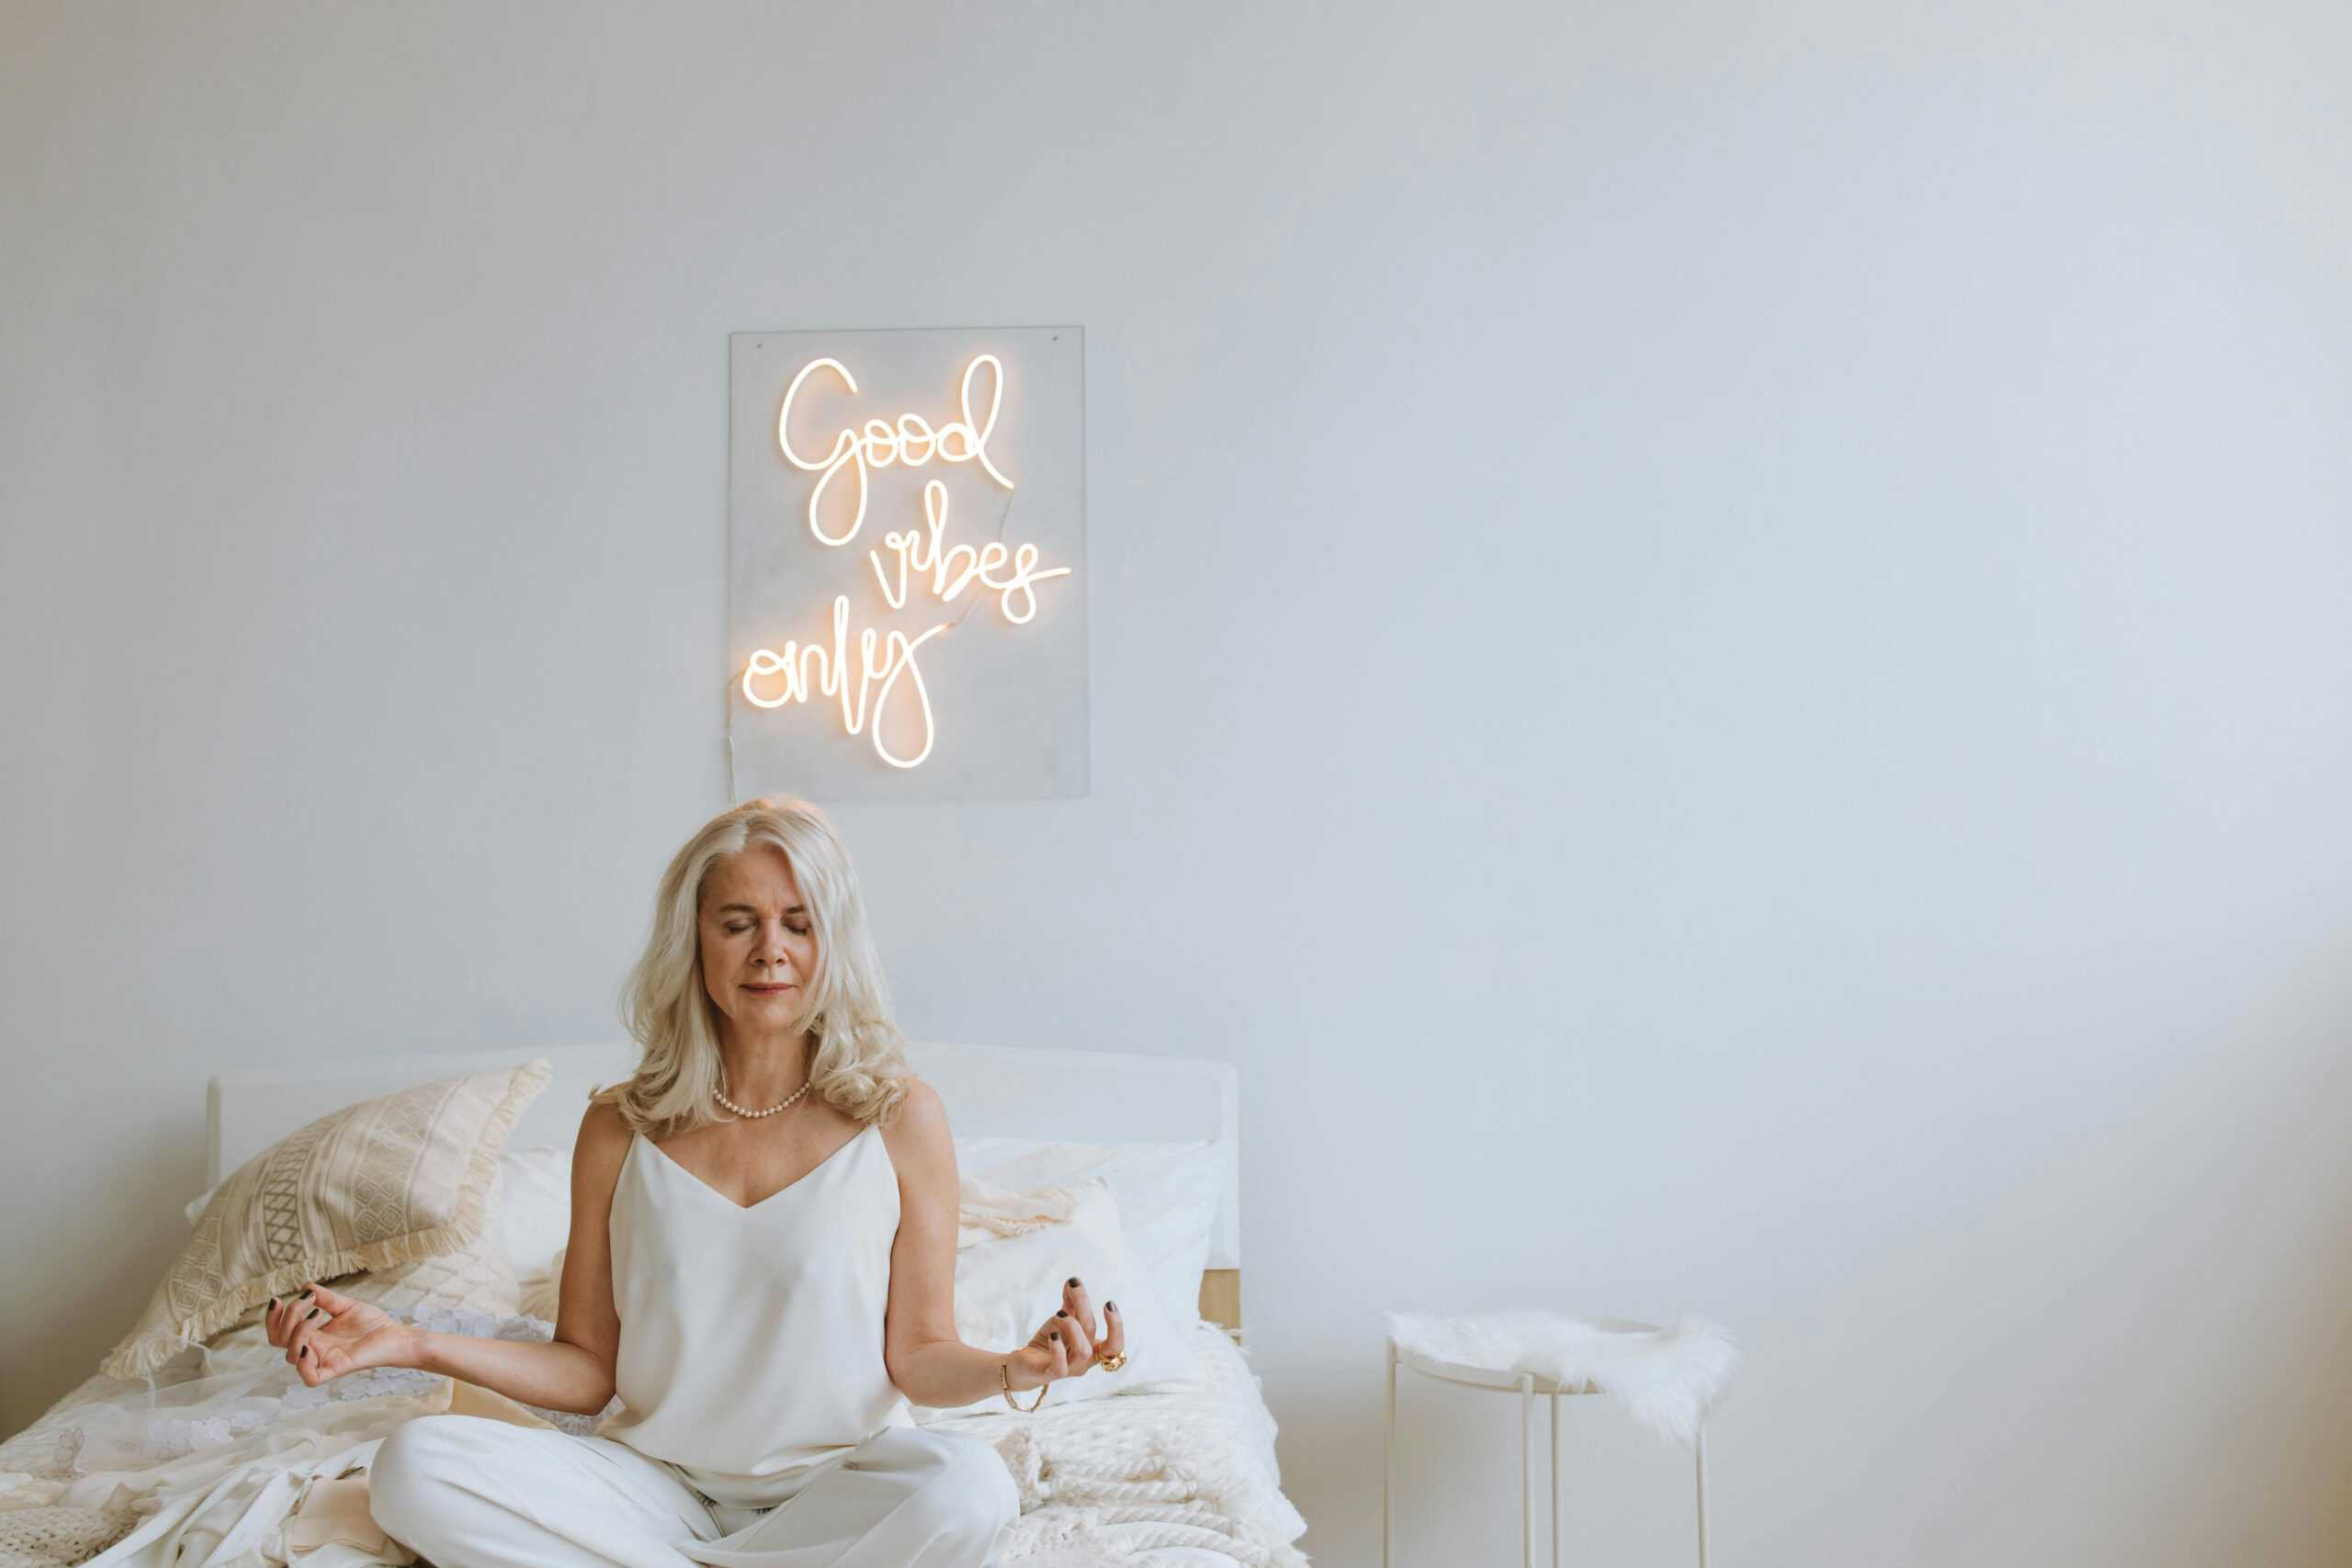 A woman embracing the concept of lifelong learning while meditating on a bed with a good night sign.